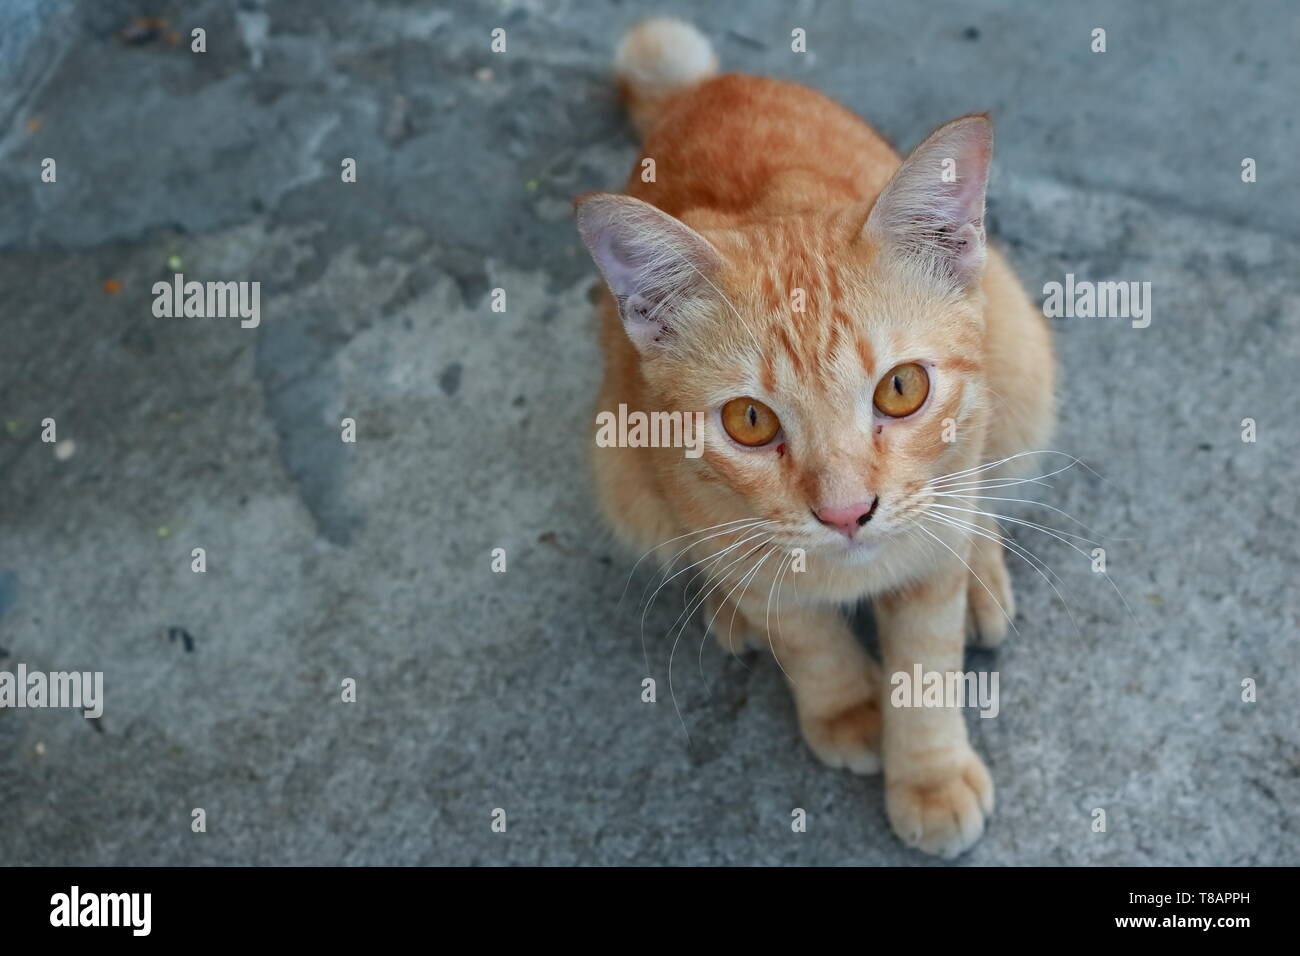 Closeup of cute ginger cat sitting on the ground and looking at the camera Stock Photo